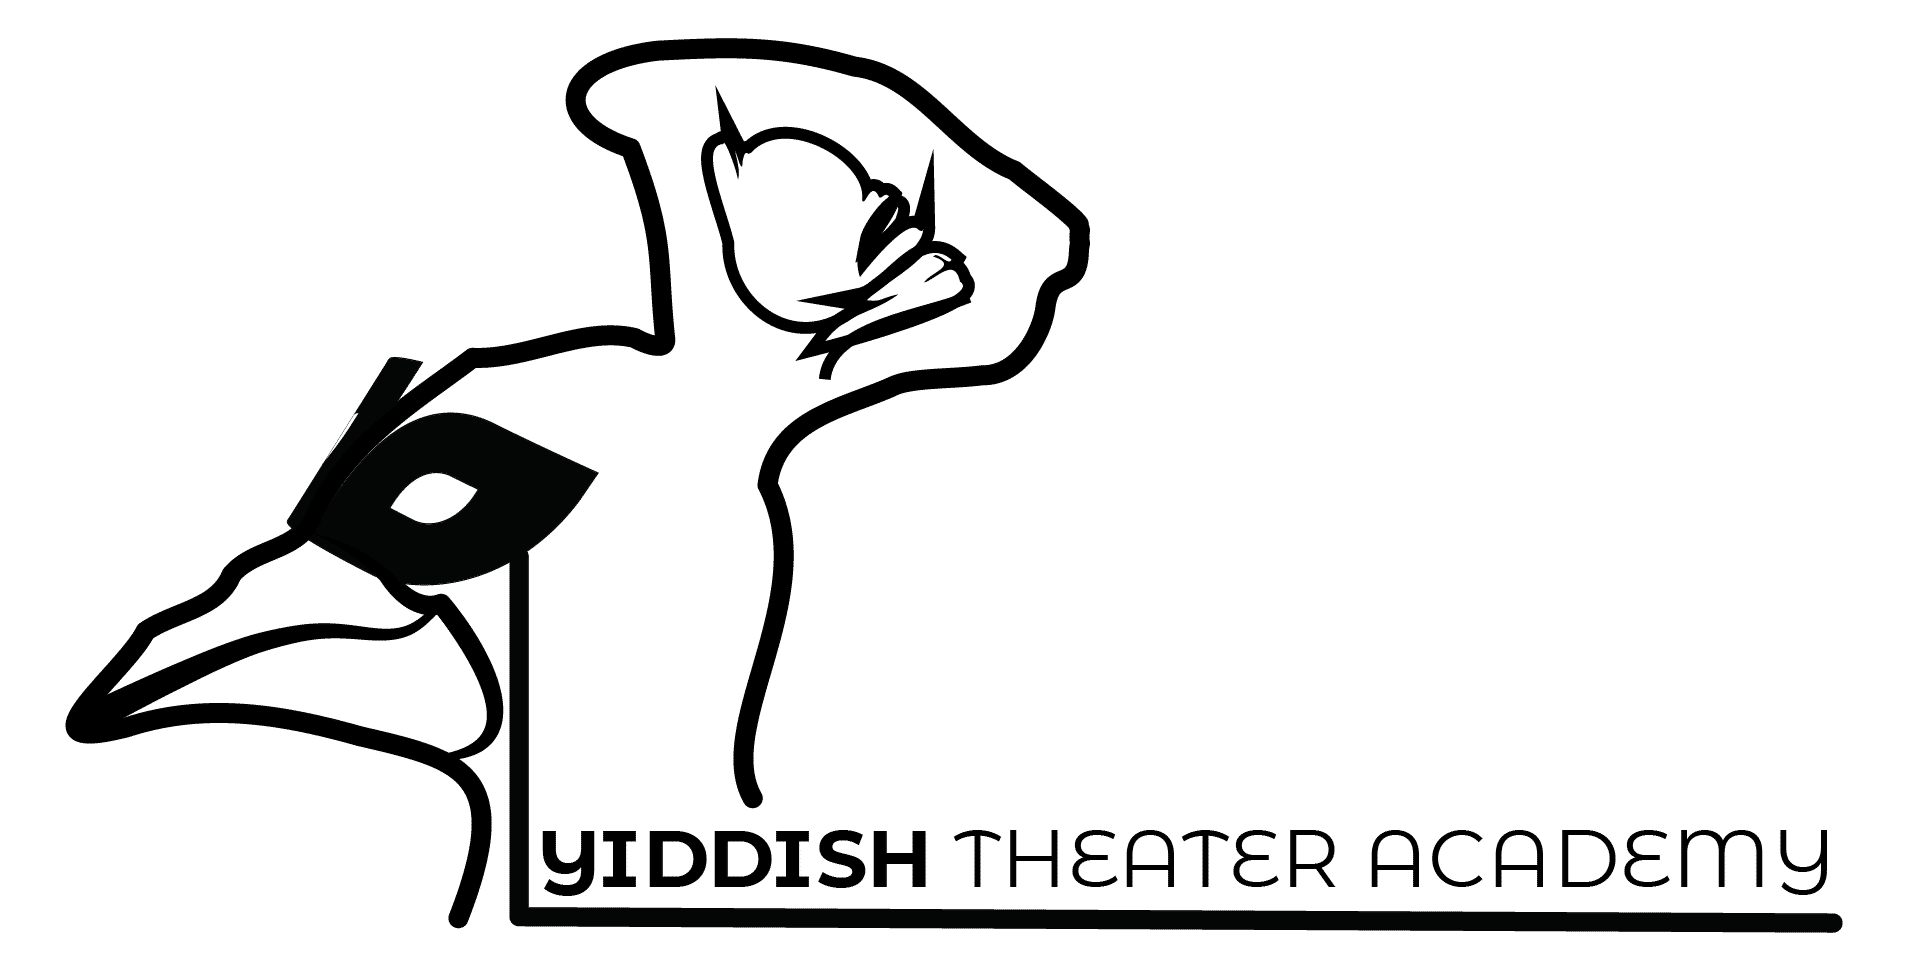 An image of the yiddish theater academy logo.